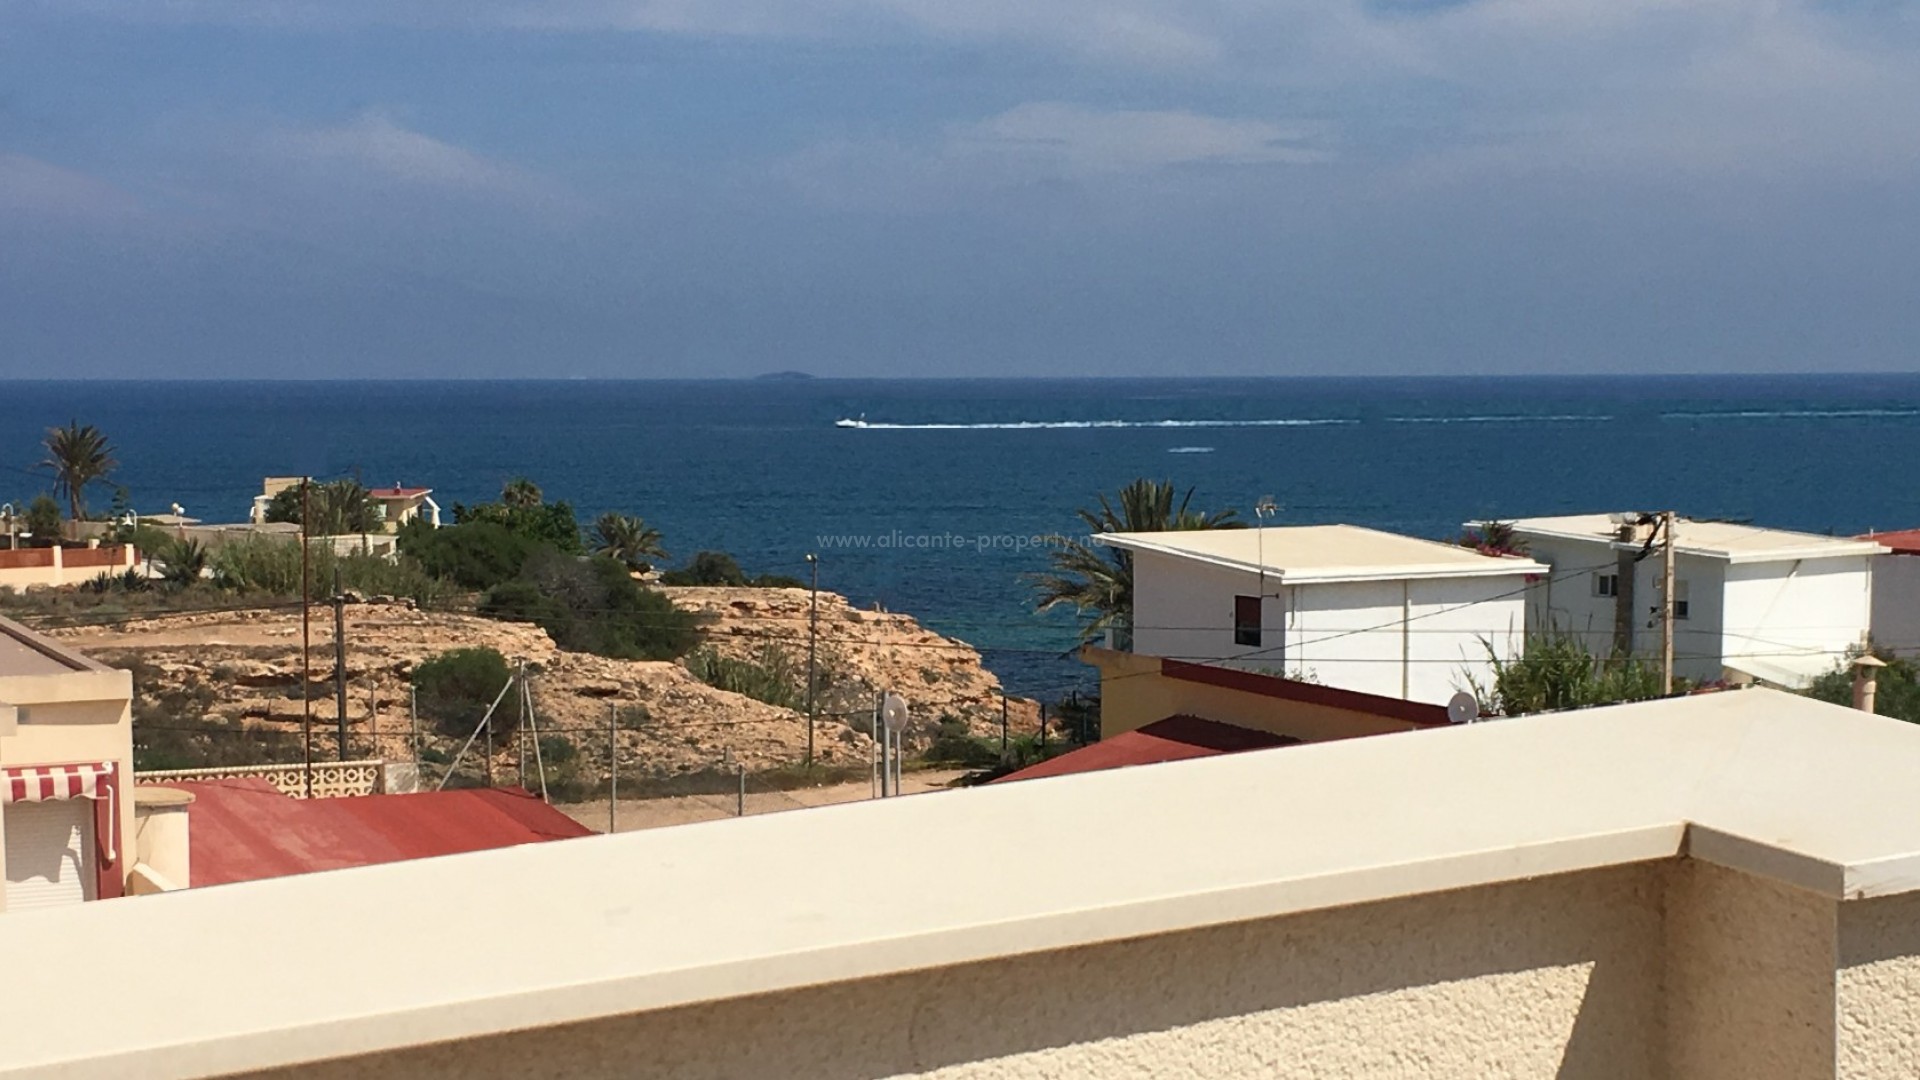 Beautiful villas for sale with sea view, 3 bedrooms, 3 bathrooms, several terraces/solarium, garden with private pool, large basement of 67 m2, 2 min walk to beach